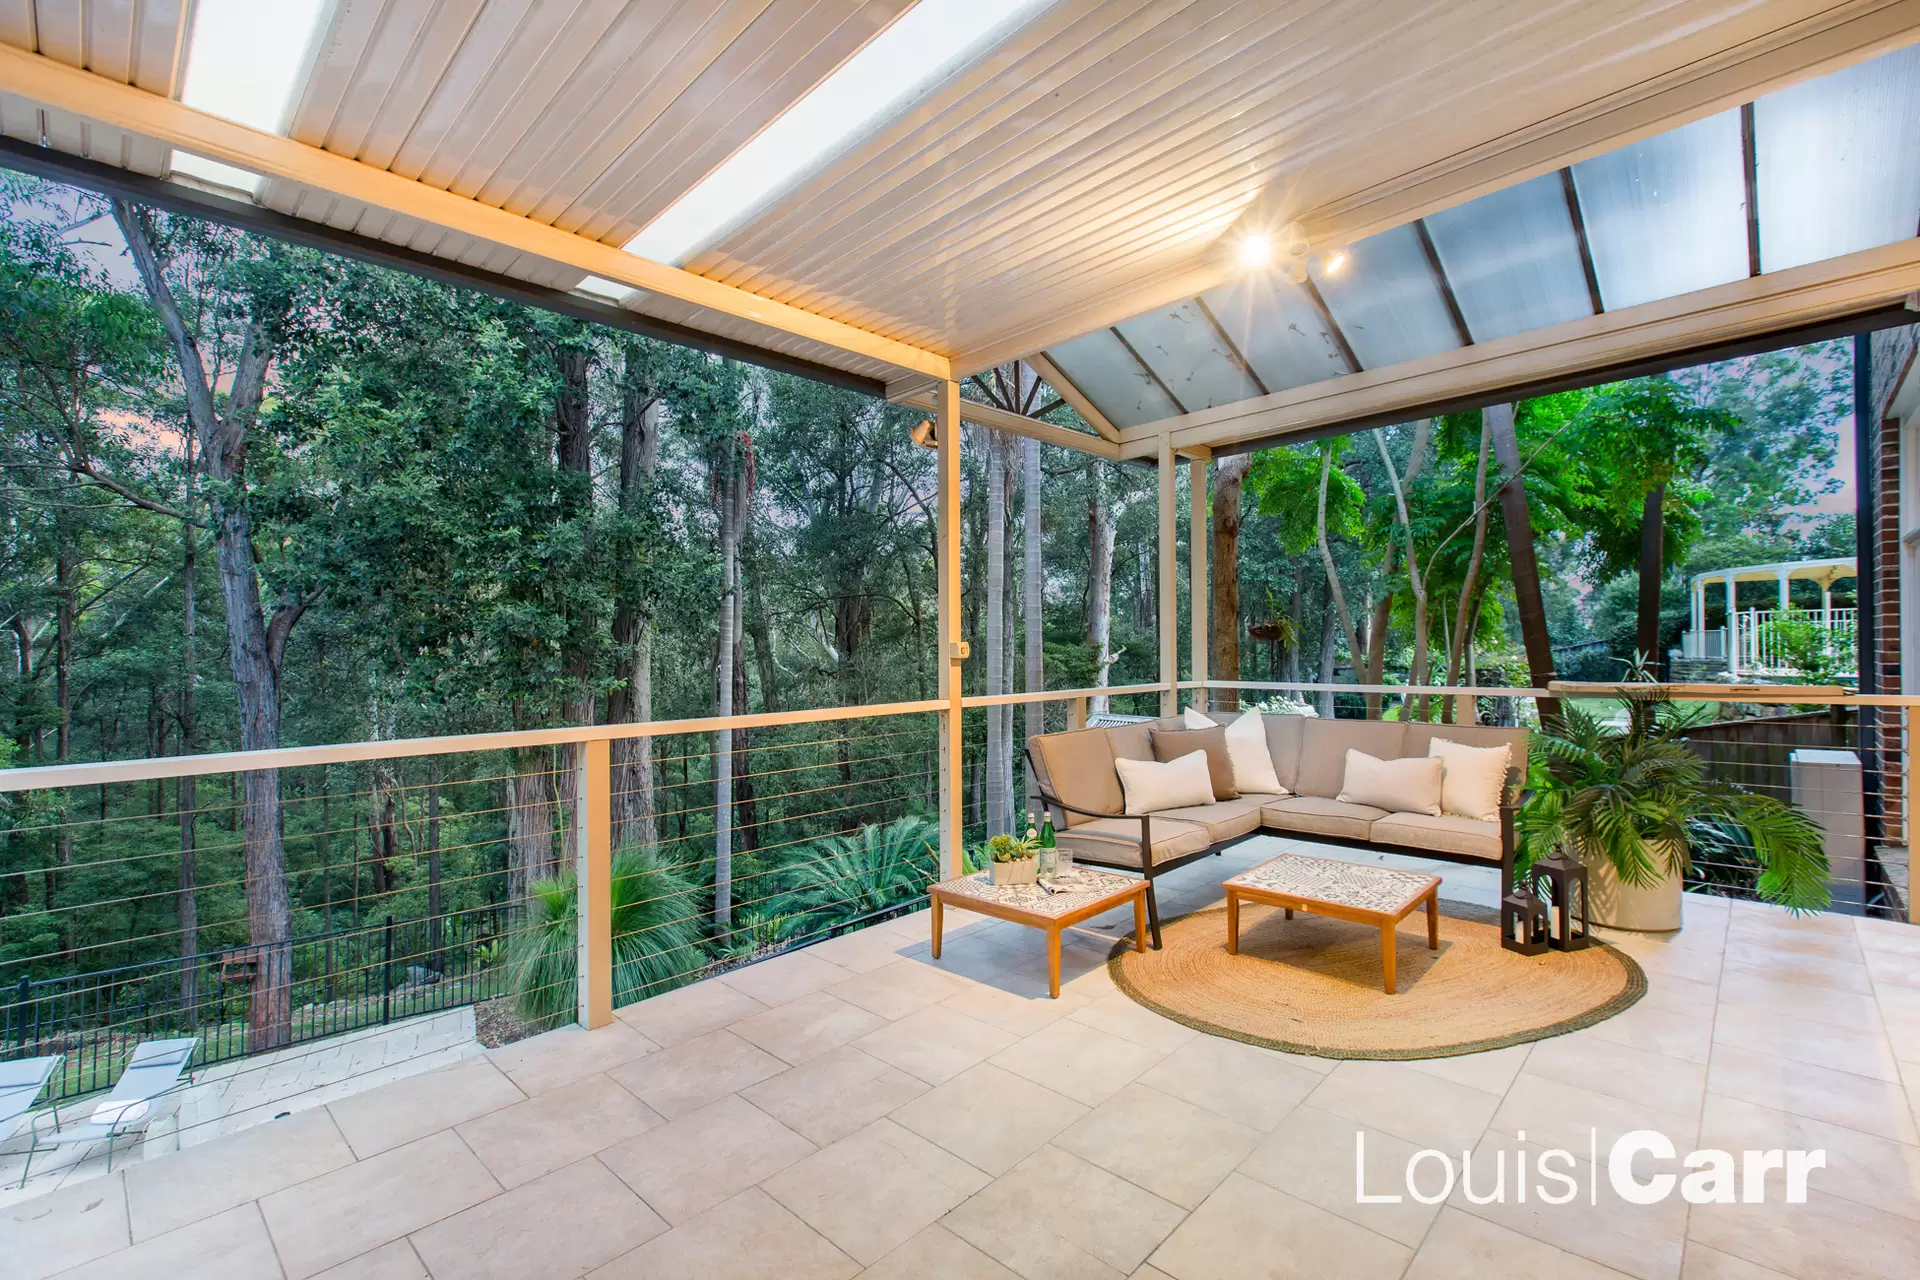 Photo #12: 78 Alana Drive, West Pennant Hills - For Sale by Louis Carr Real Estate